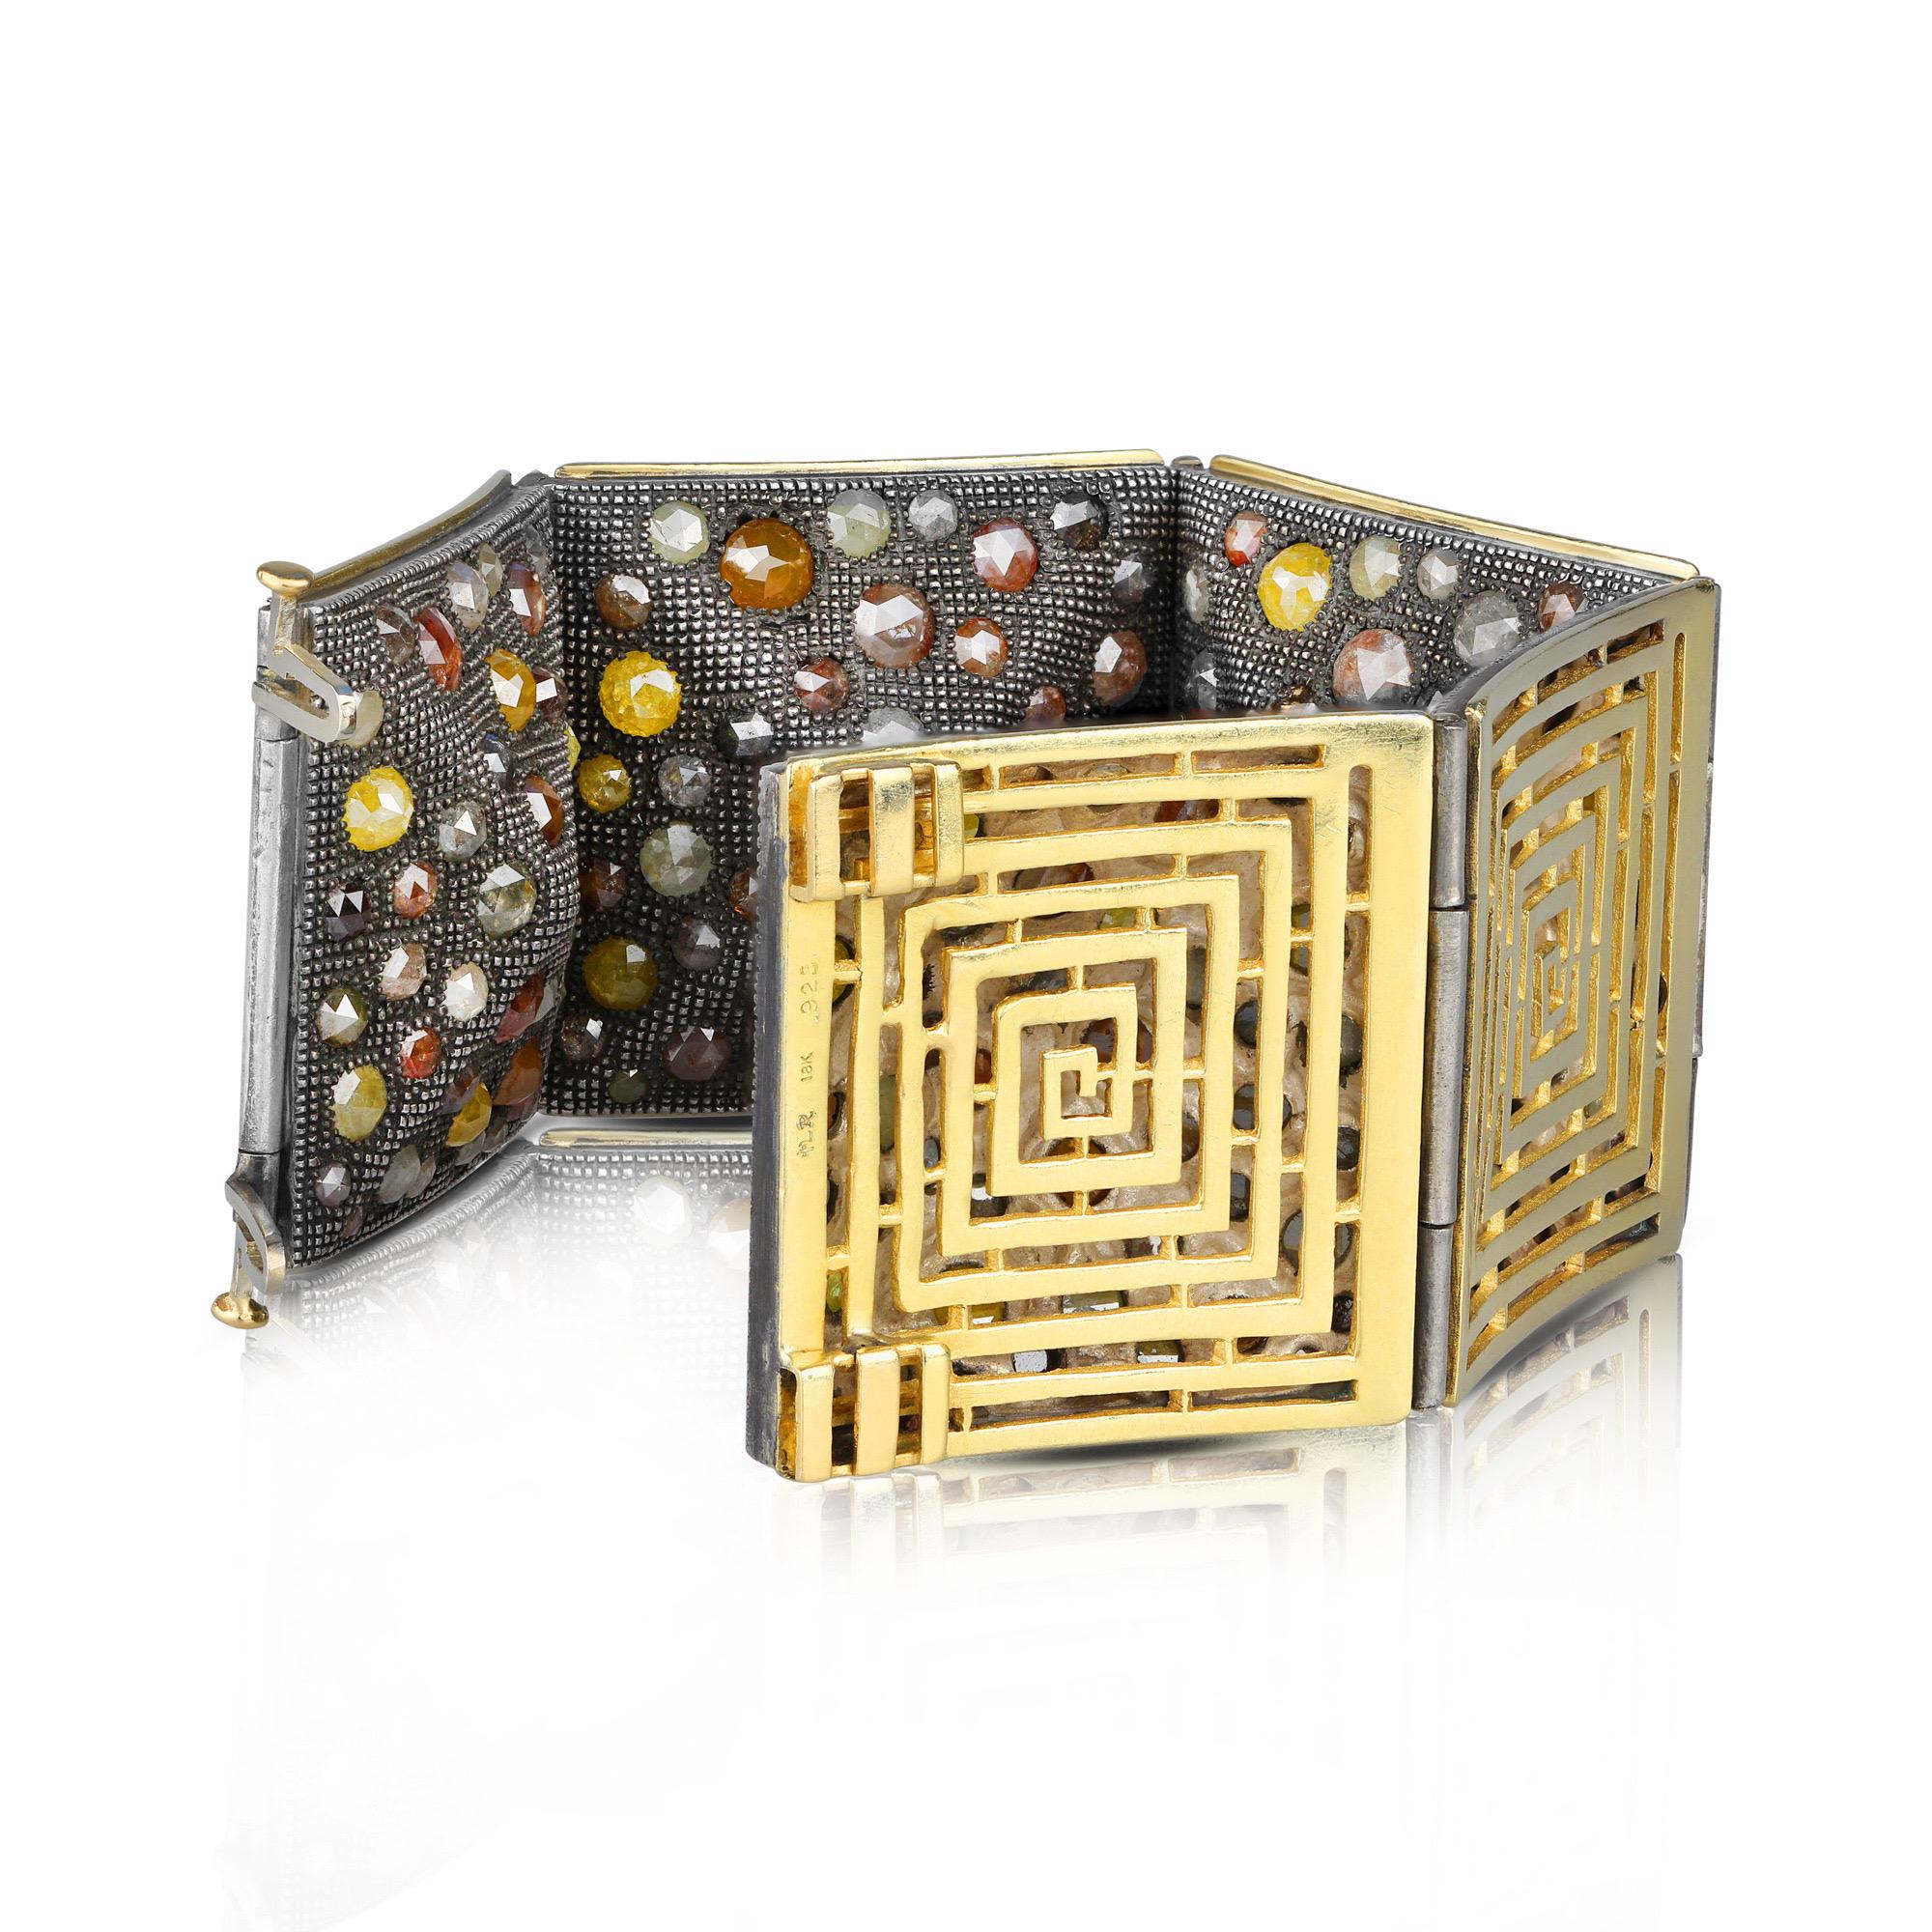 Maker: Loree Rodkin

Era: Late 2000s

Composition: 18K Yellow Gold and Sterling Silver

Primary Stone: Fancy Color Rose Cut Diamonds (Approximately 45 Total Carat Weight)

Size: 8 Inches

Weight:  171.7 Grams





